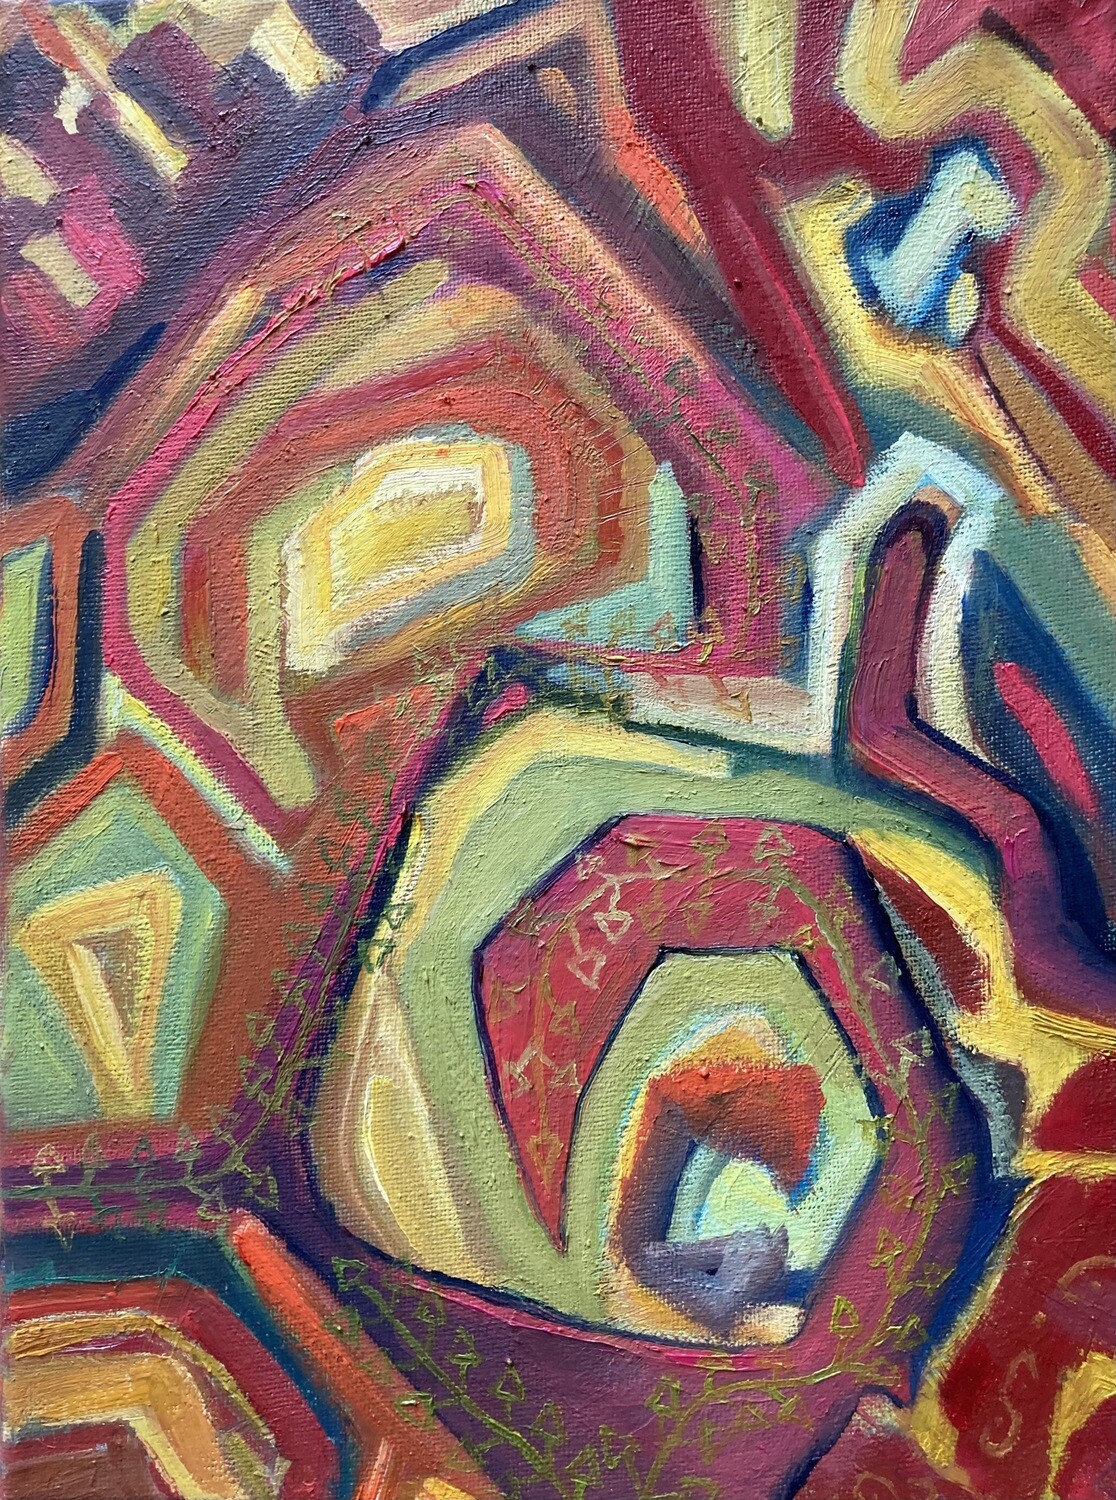 Conversations on a hearth rug 1, oil on canvas